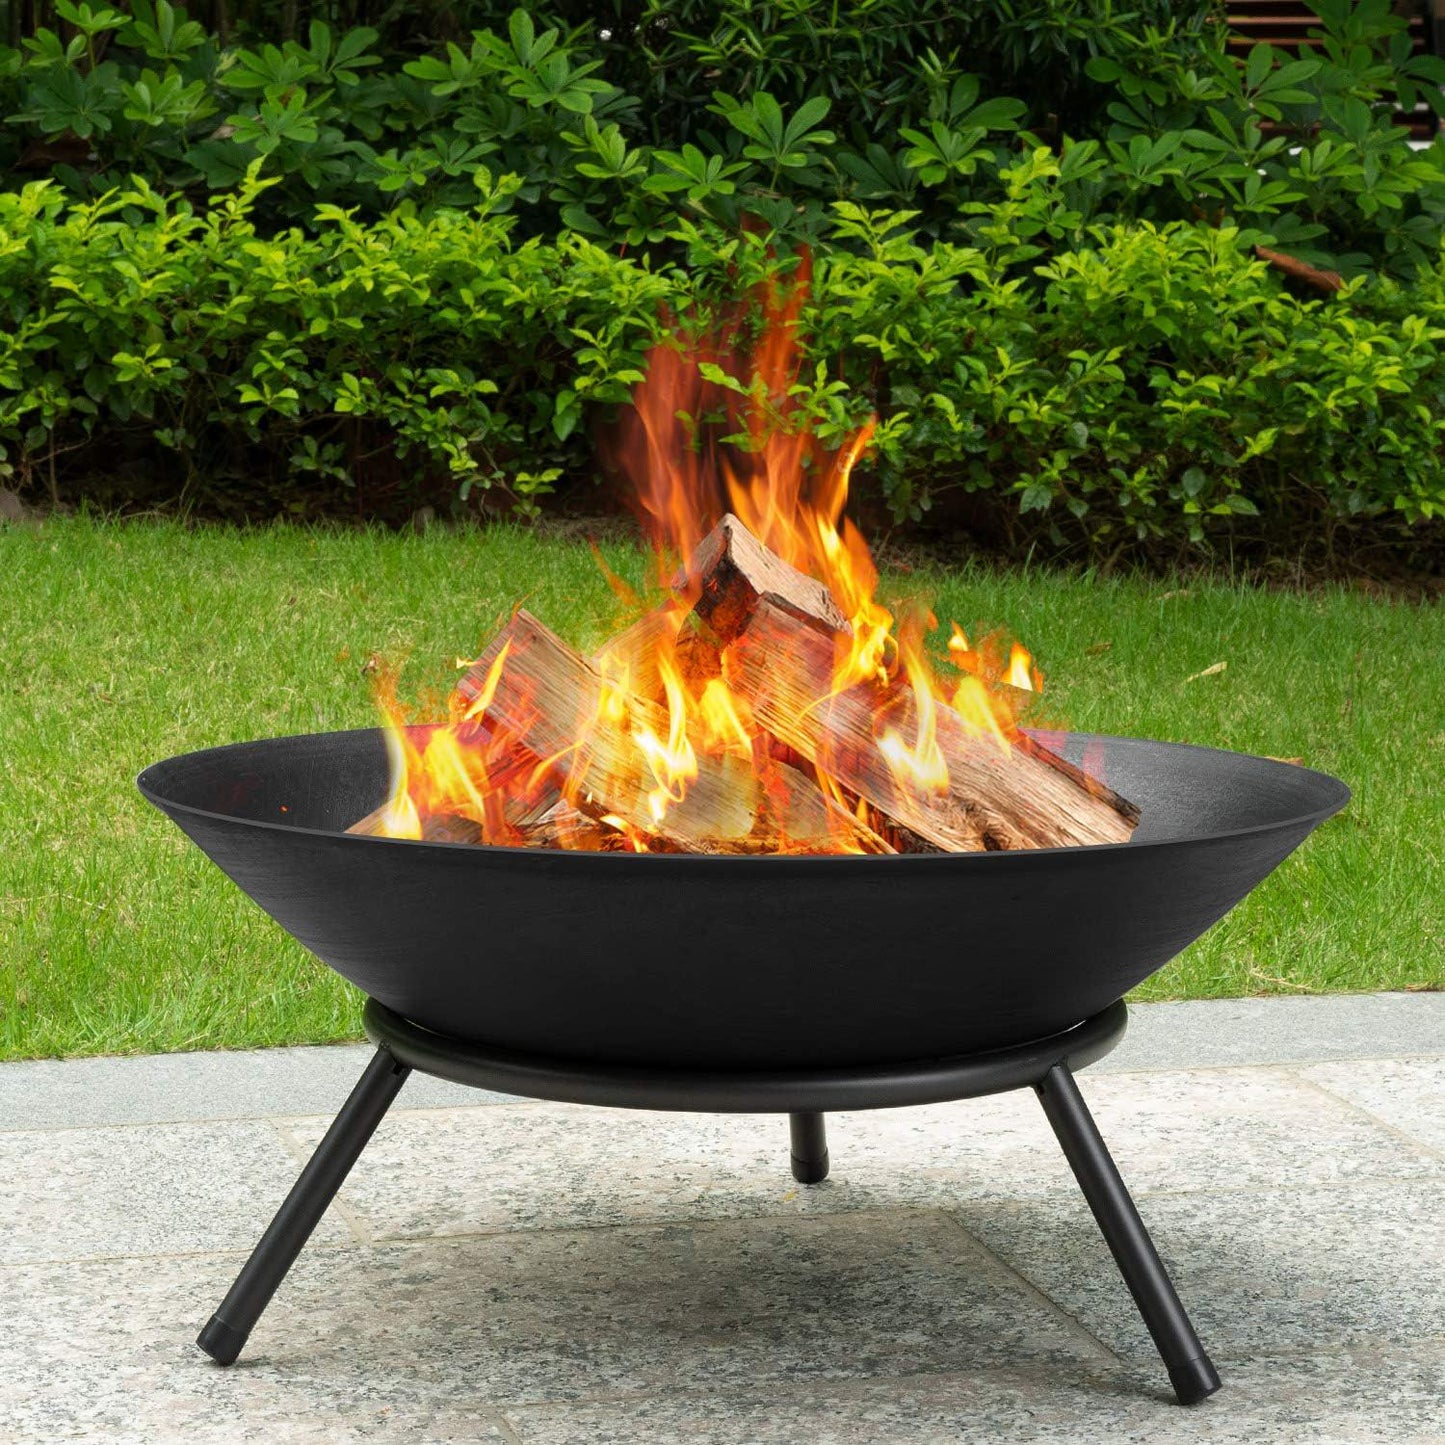 Amagabeli Fire Pit Outdoor Wood Burning 22.6in Firepit Firebowl Fireplace Heater Log Charcoal Burner Extra Deep Large Round Camping Outside Patio Backyard Deck Heavy Duty Metal Grate ET288